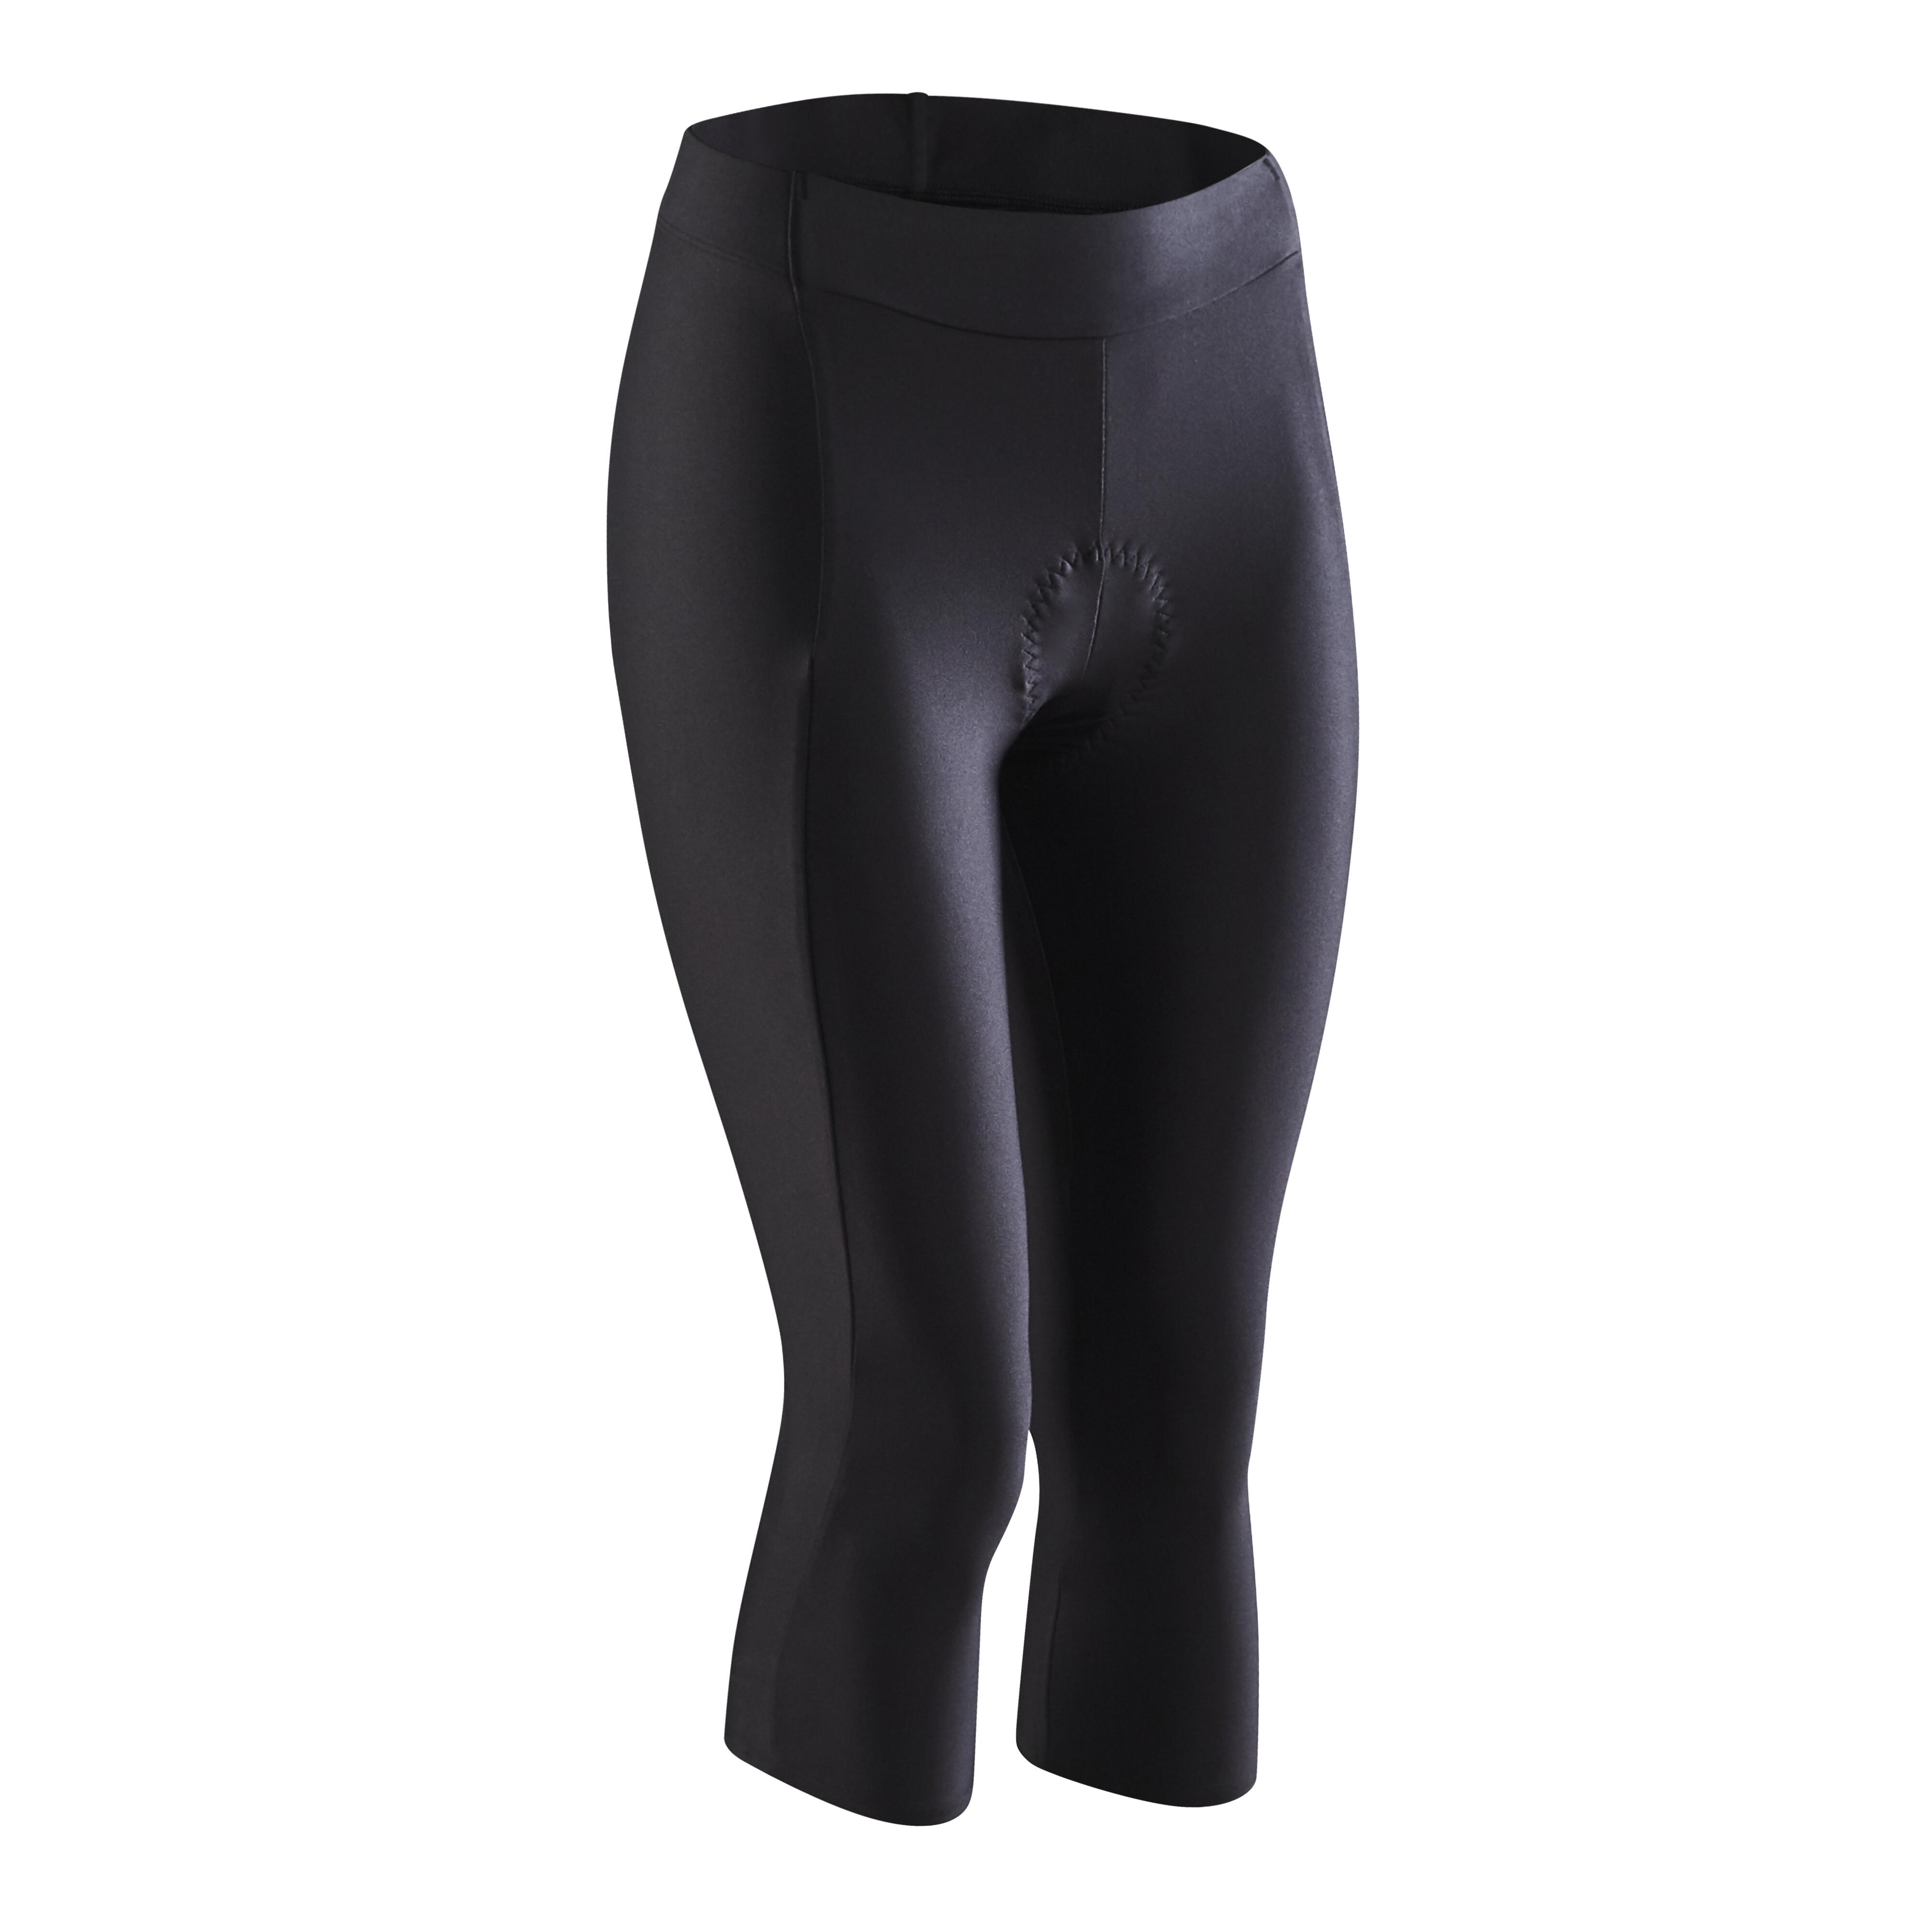 Women's 3/4 Tights, Women's 3/4 Tights For Cold Weather Cycling